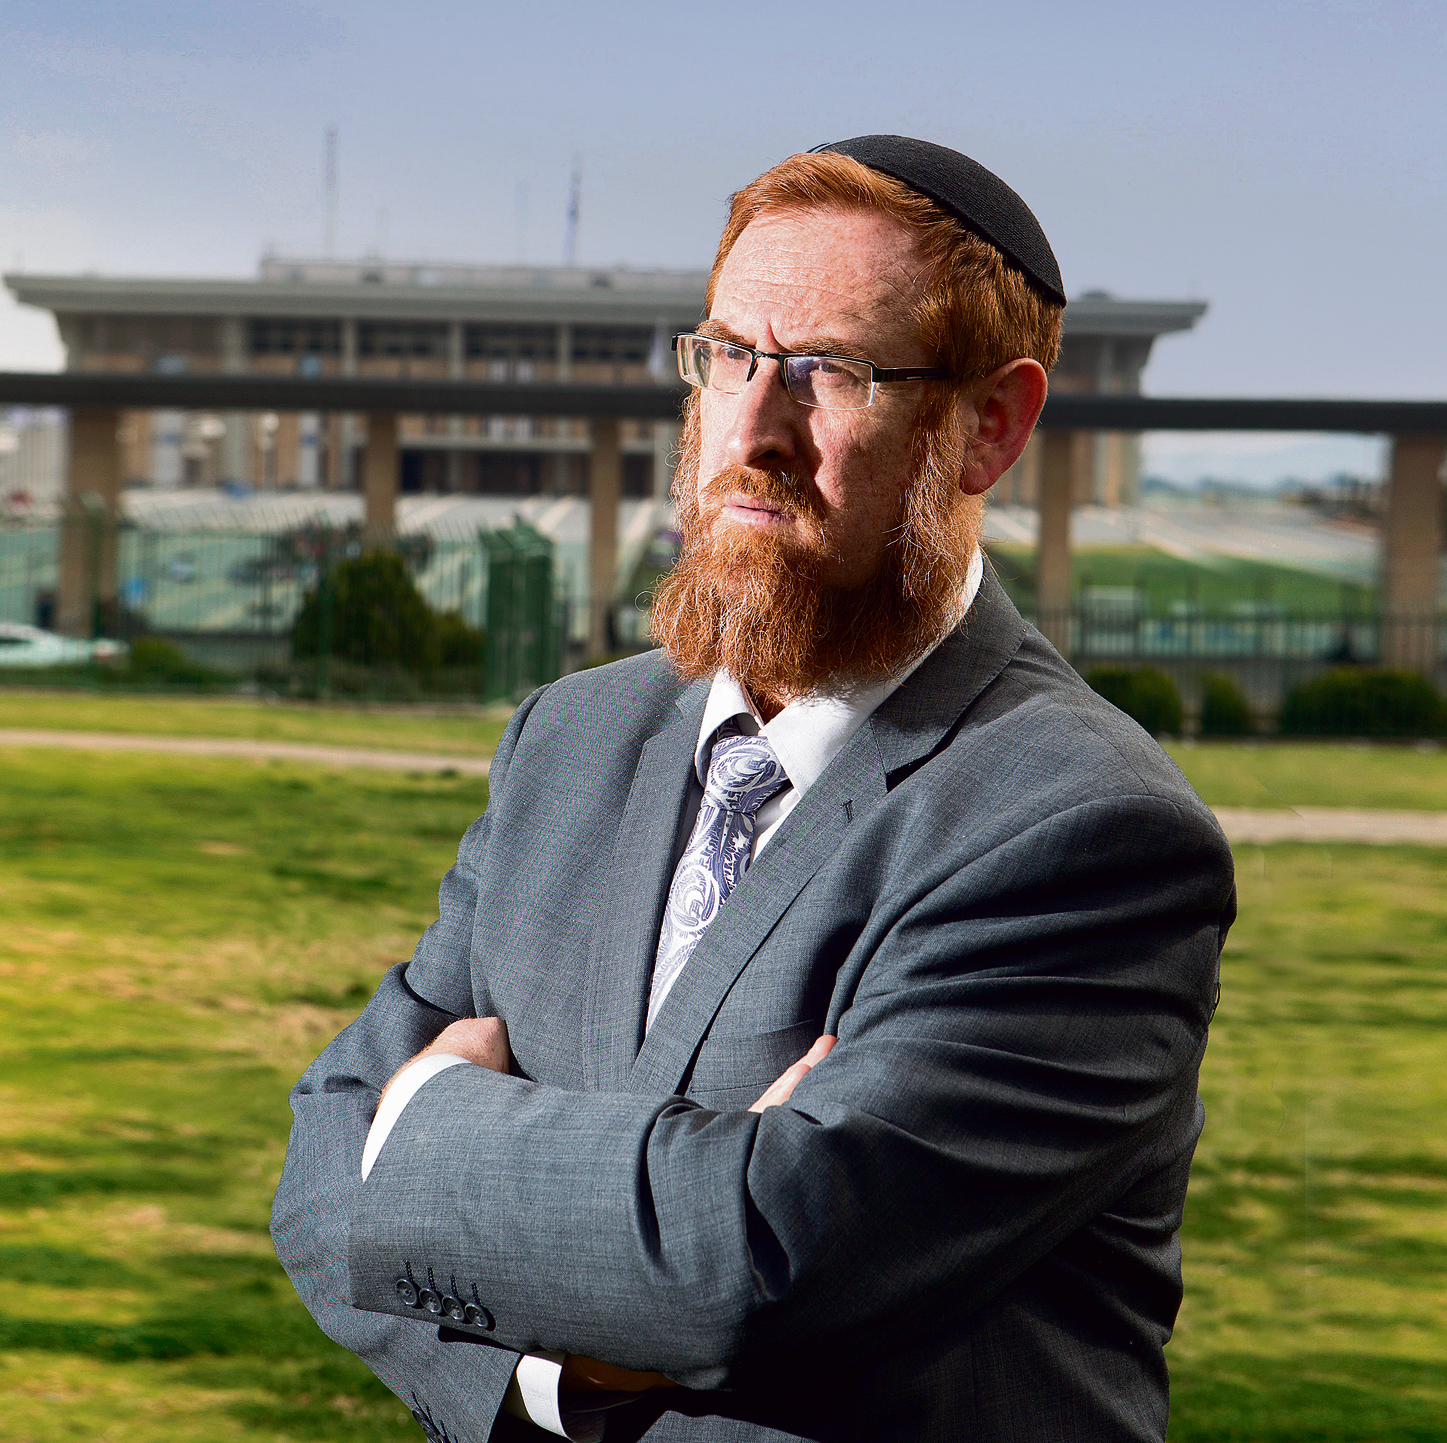 Yehuda Glick at the Knesset, last week. ‘A prime minister cannot give the police an illegal order' (Photo: Alex Kolomoisky)